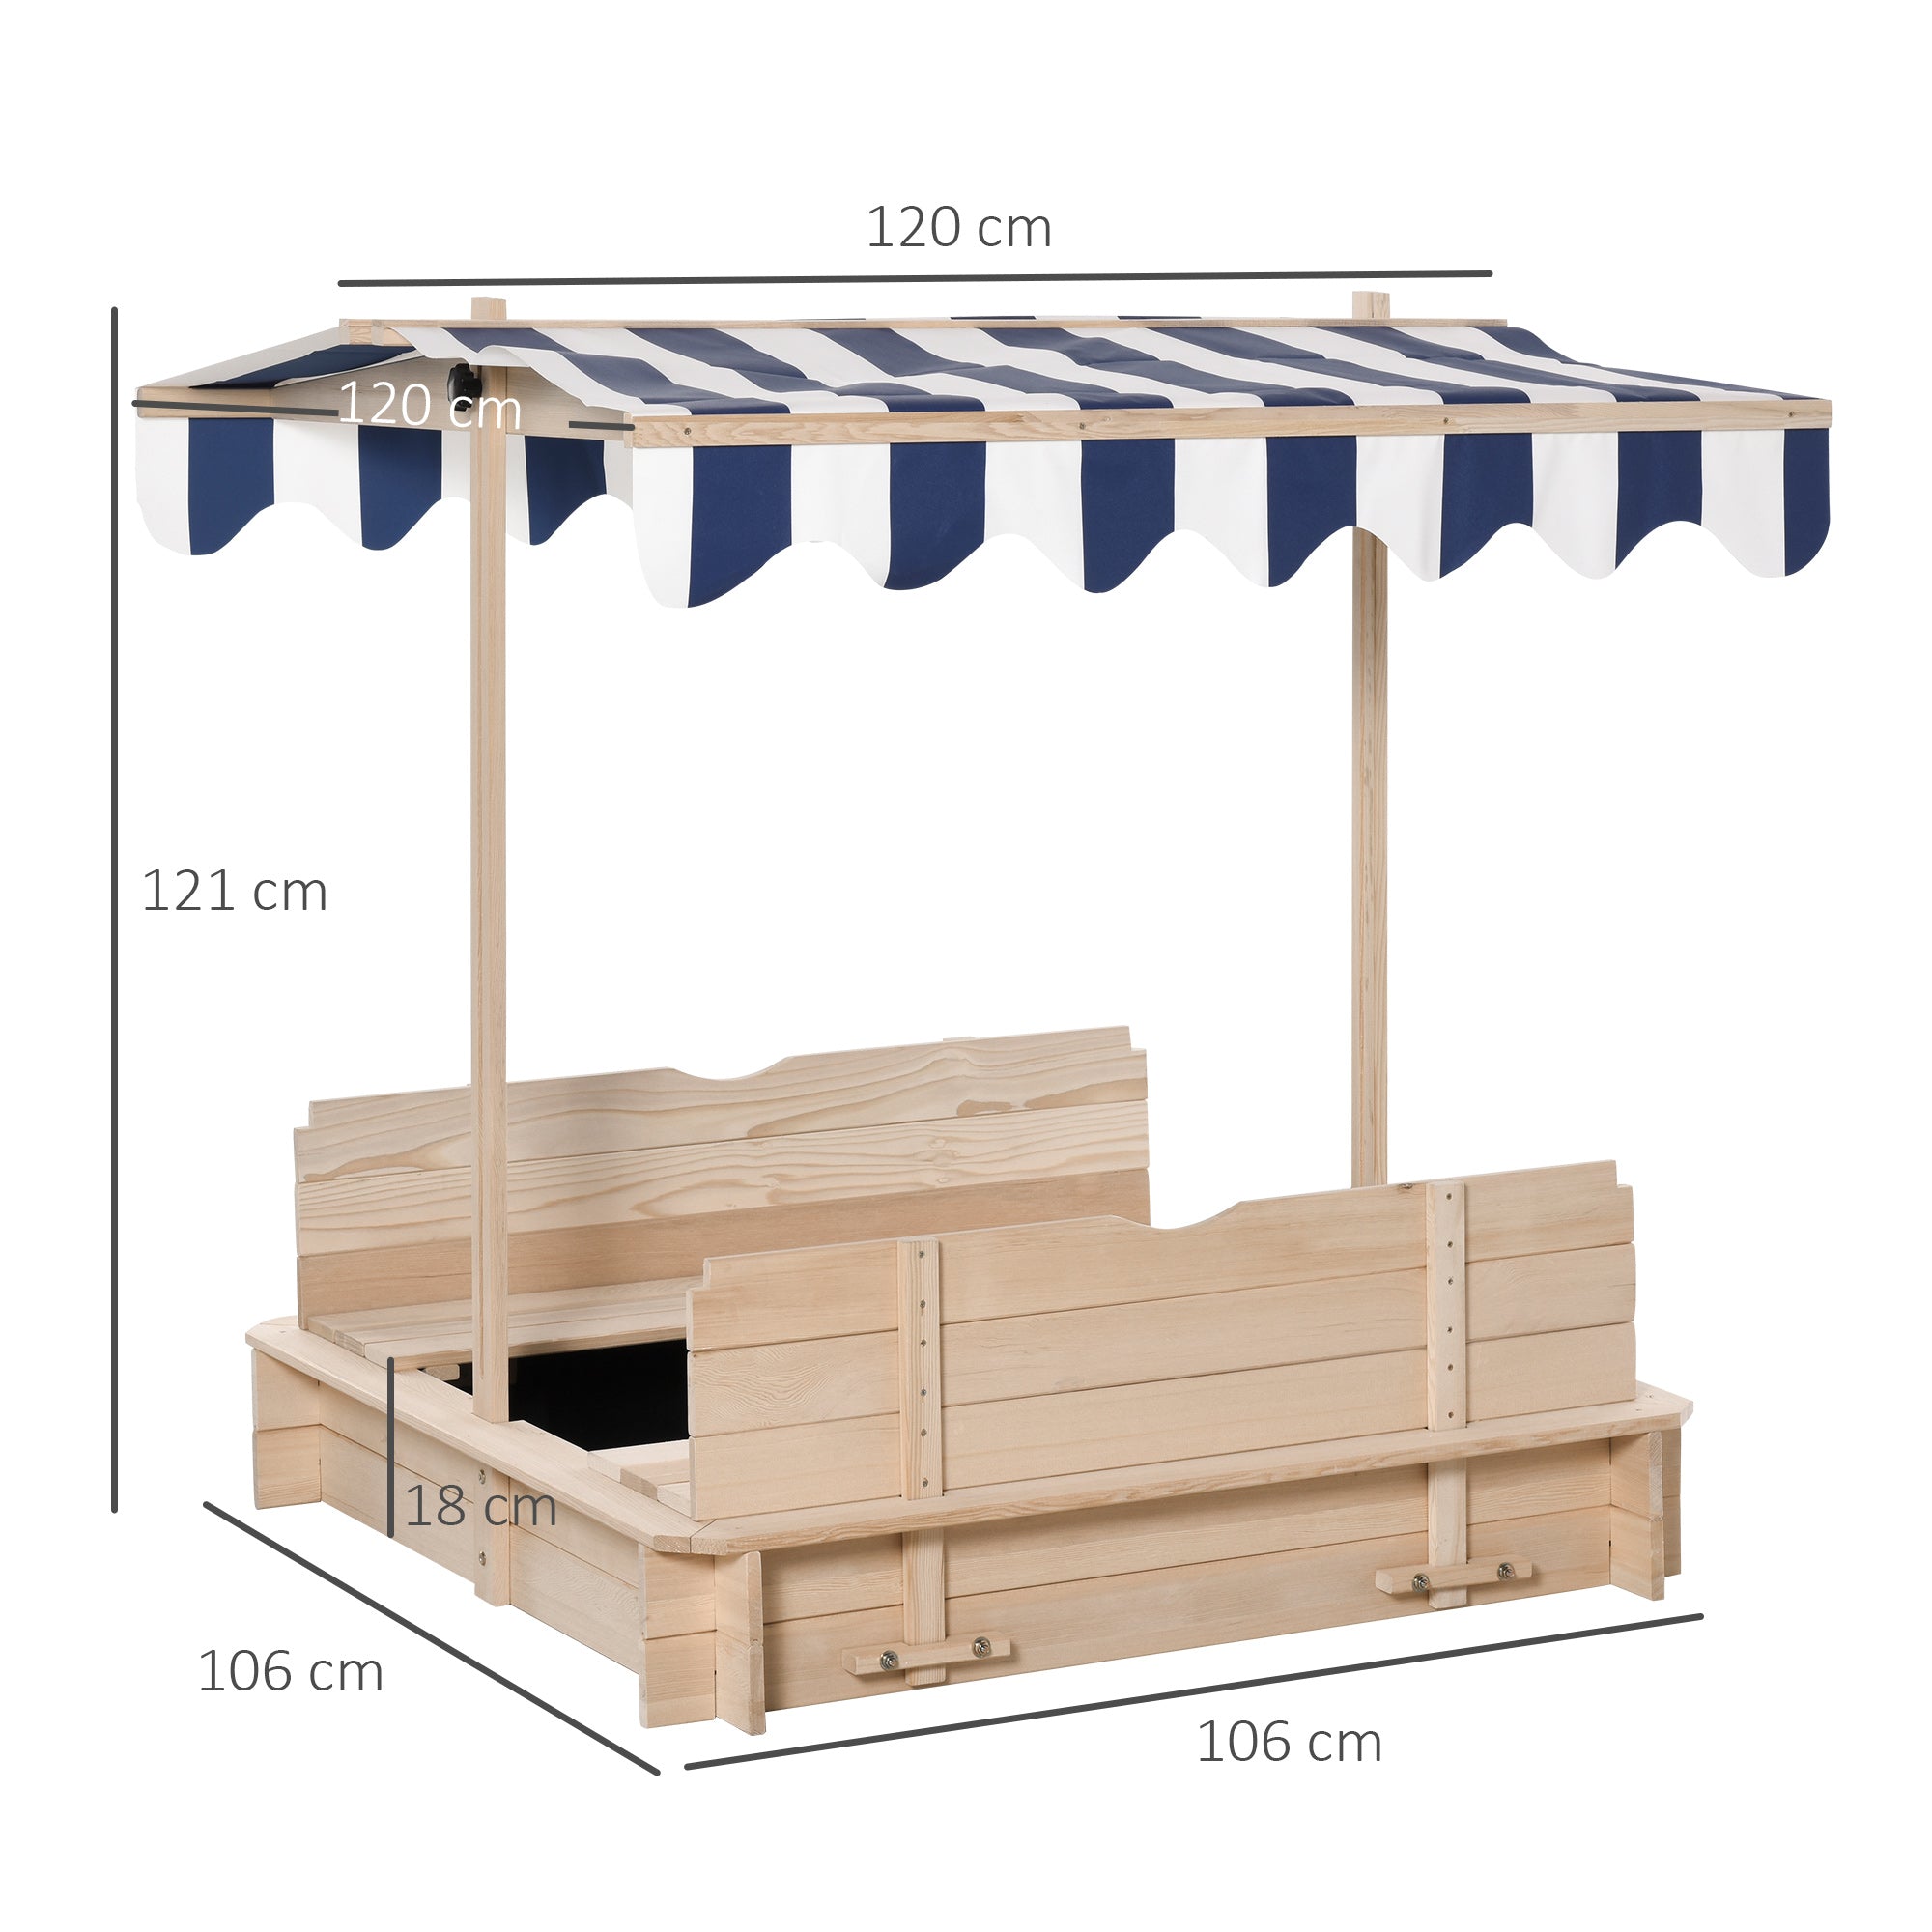 Outsunny Kids Square Wooden Sandpit Children Cabana Sandbox Outdoor Backyard Playset Play Station Adjustable Canopy, 106x106x121cm - Inspirely